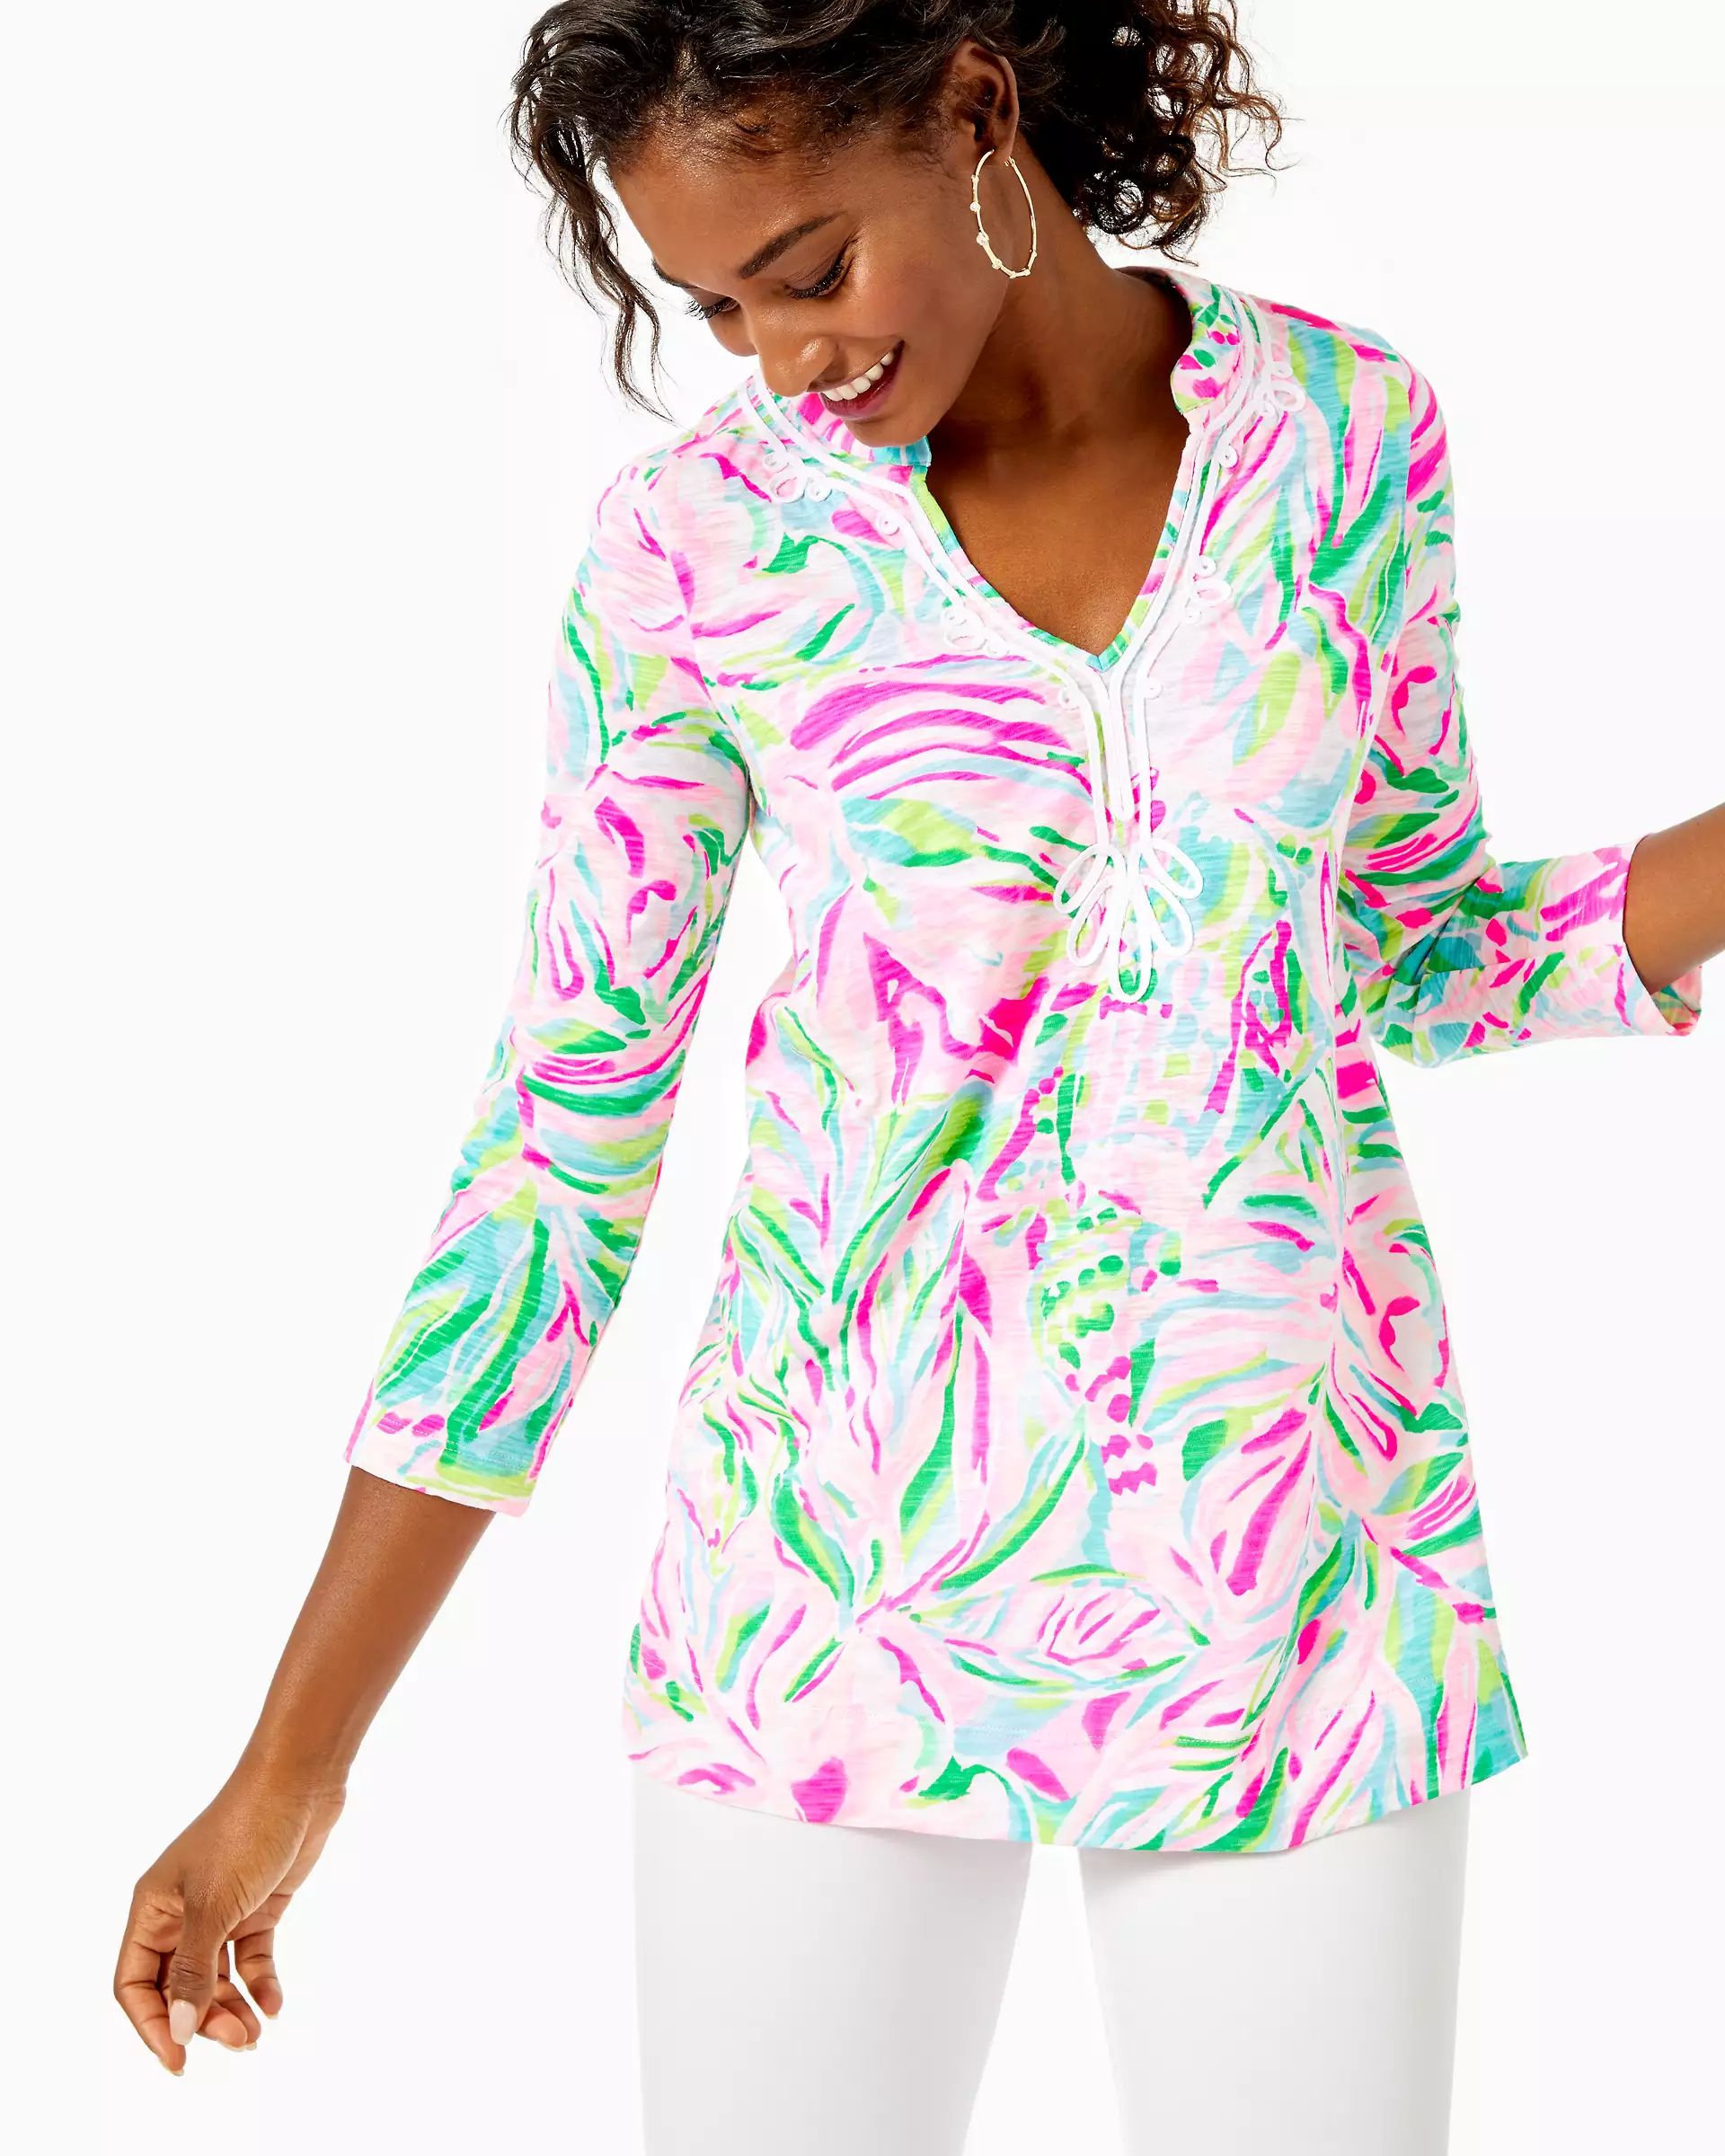 Kaia Knit Tunic Top | Lilly Pulitzer